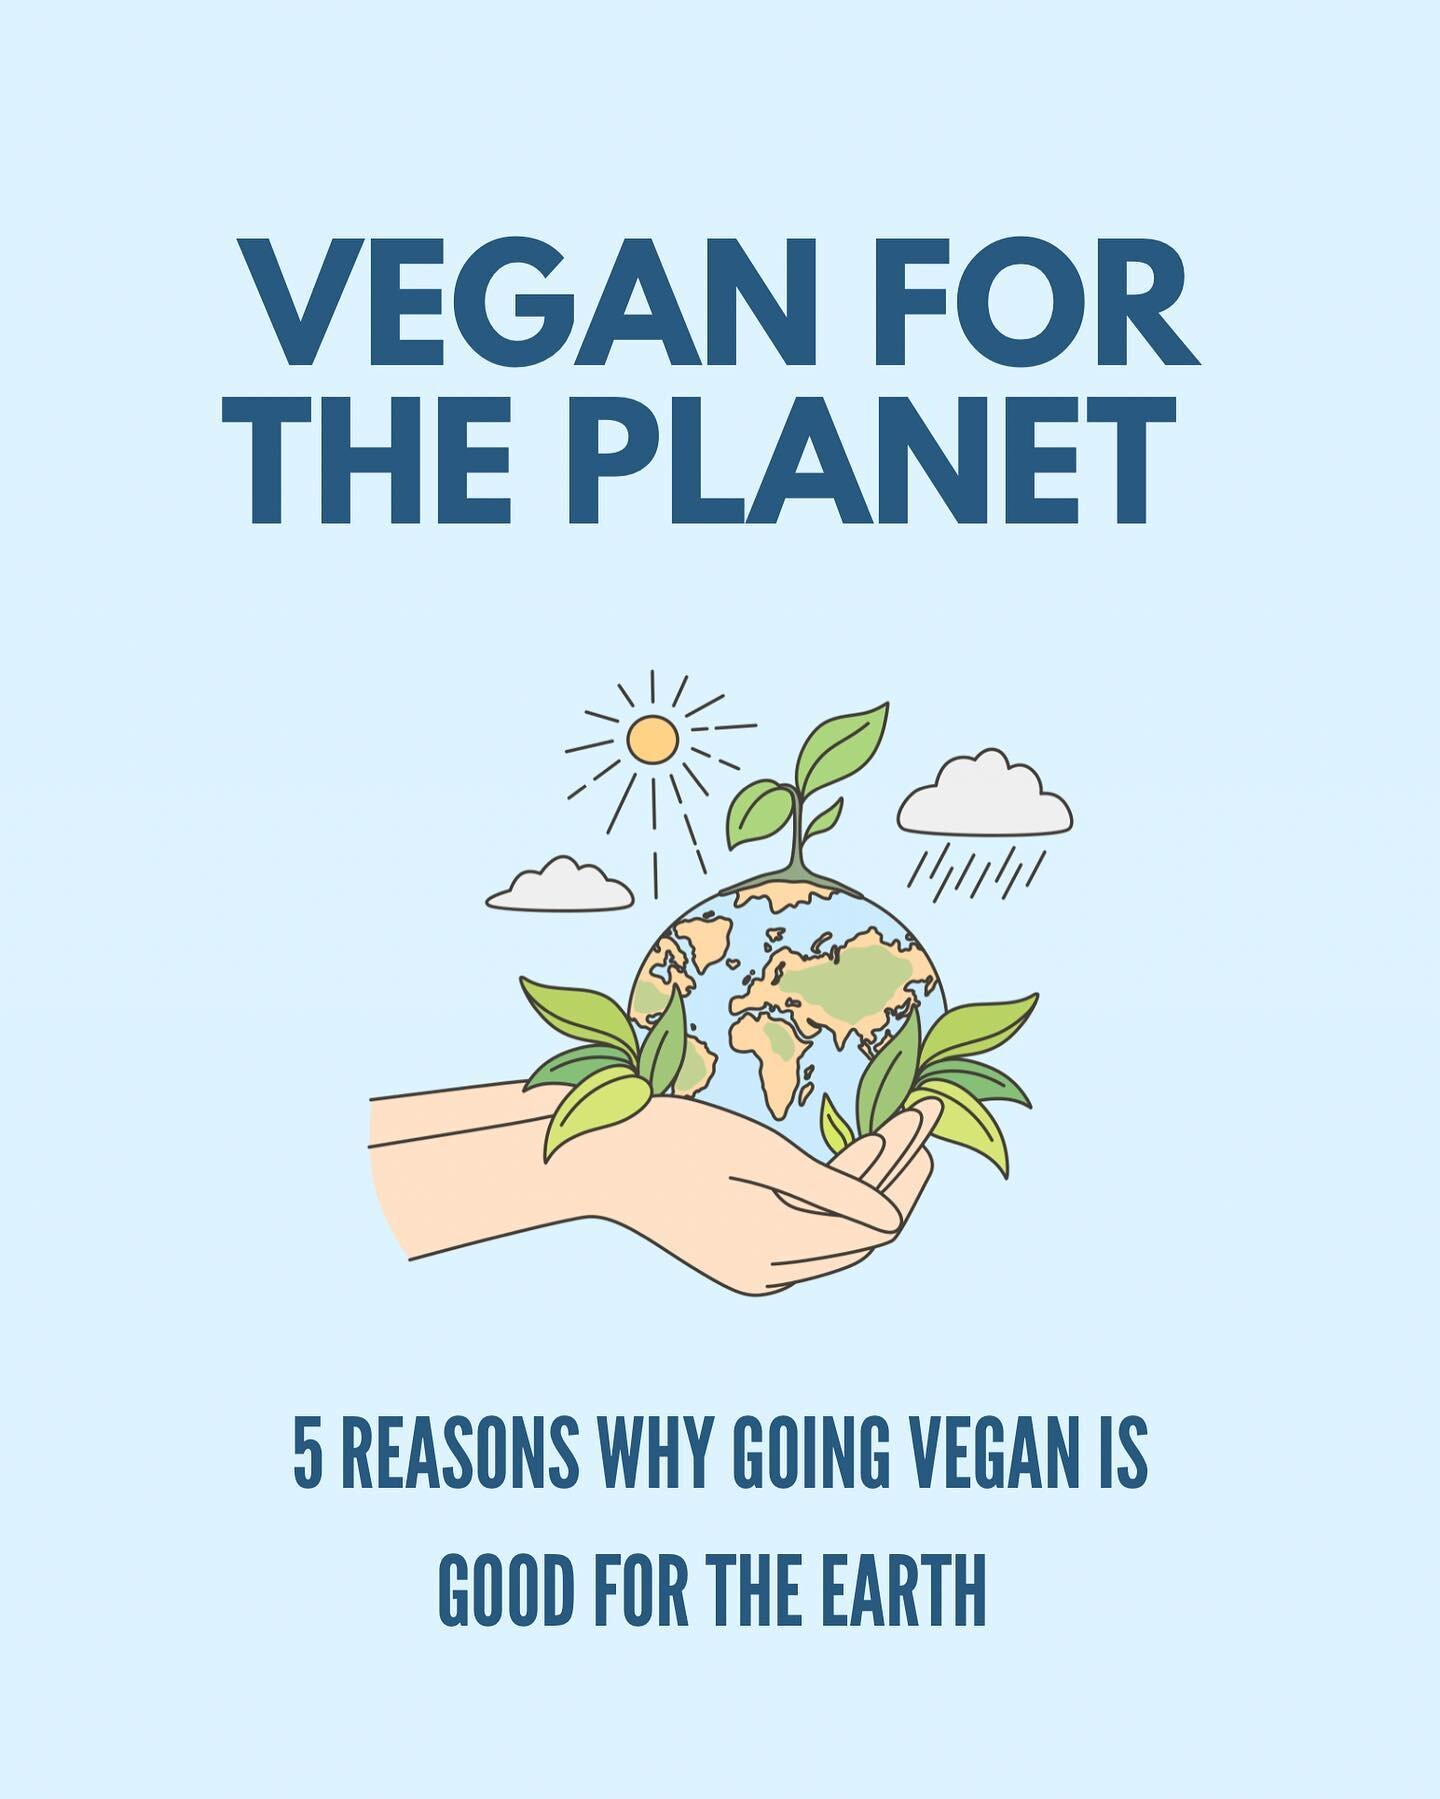 Earth Day is the perfect time to make a change 🌍 Going vegan can help fight climate change, conserve water, protect wildlife, reduce waste, and promote healthy soils 🌿 Join the movement today! #earthday #govegan #sustainability #sustainableliving #